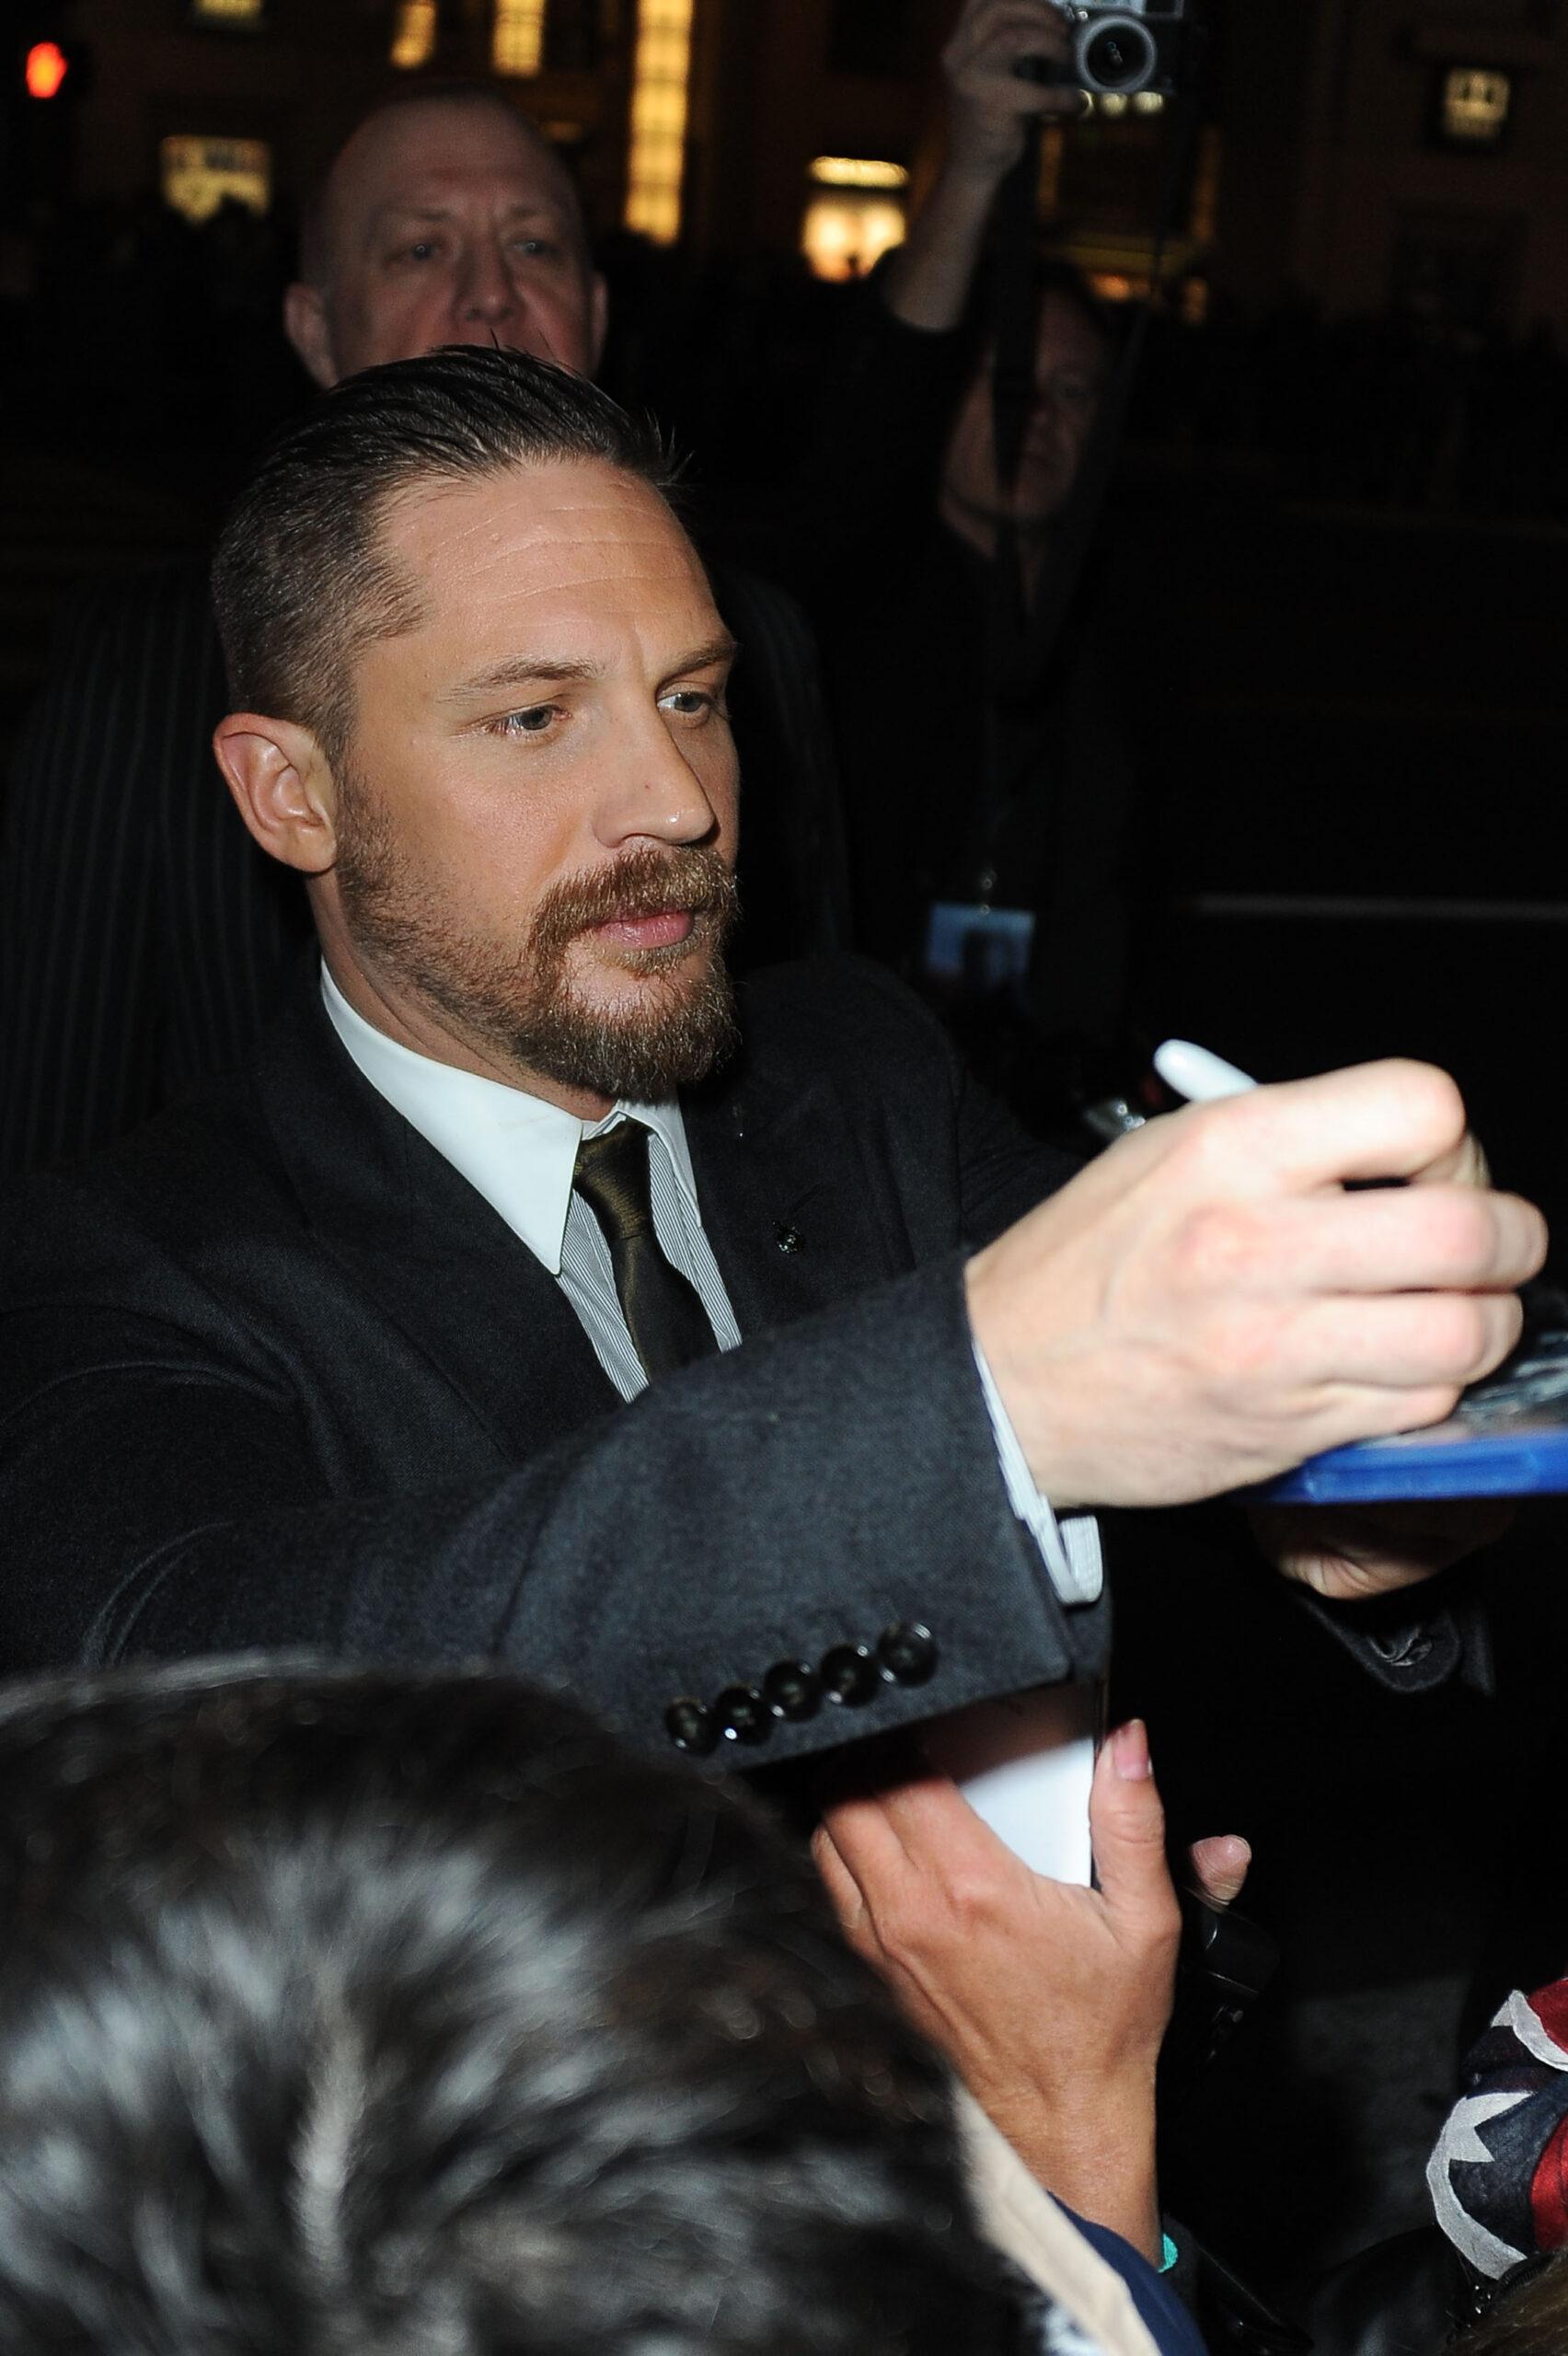 Leonardo DiCaprio and Tom Hardy arrive at The Revenant premiere in Hollywood